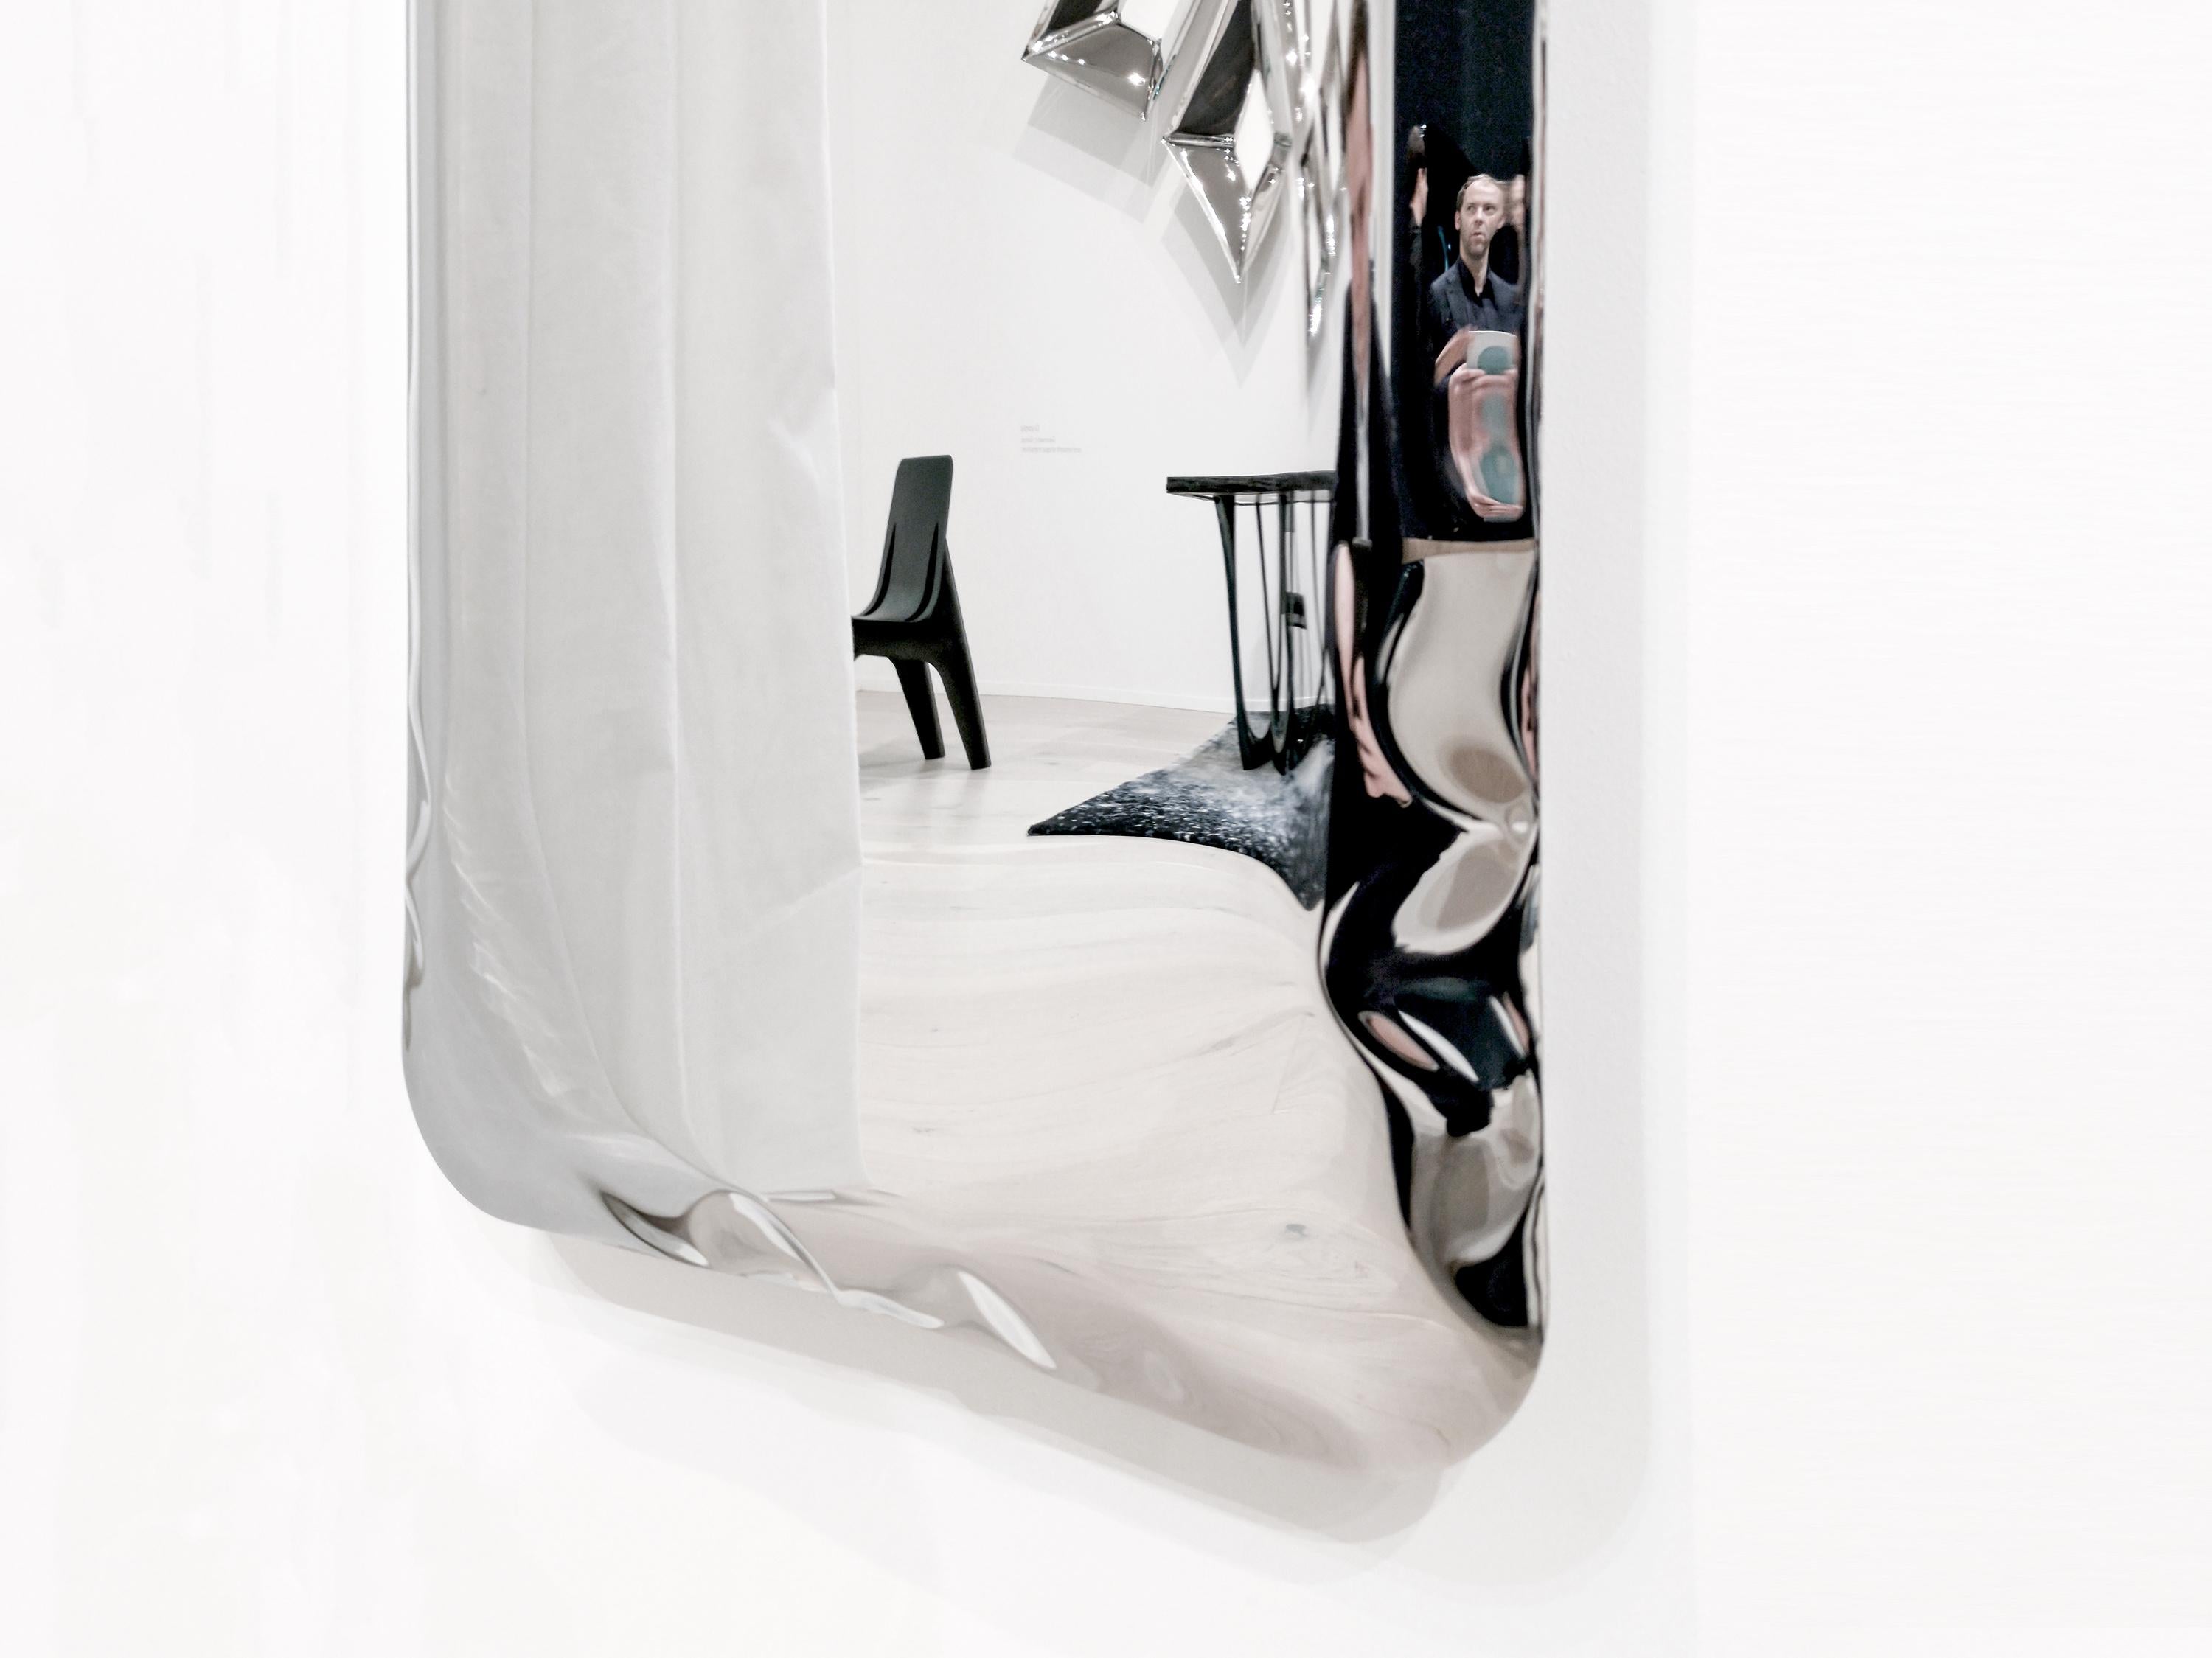 Elongated mirror, made of polished stainless steel.